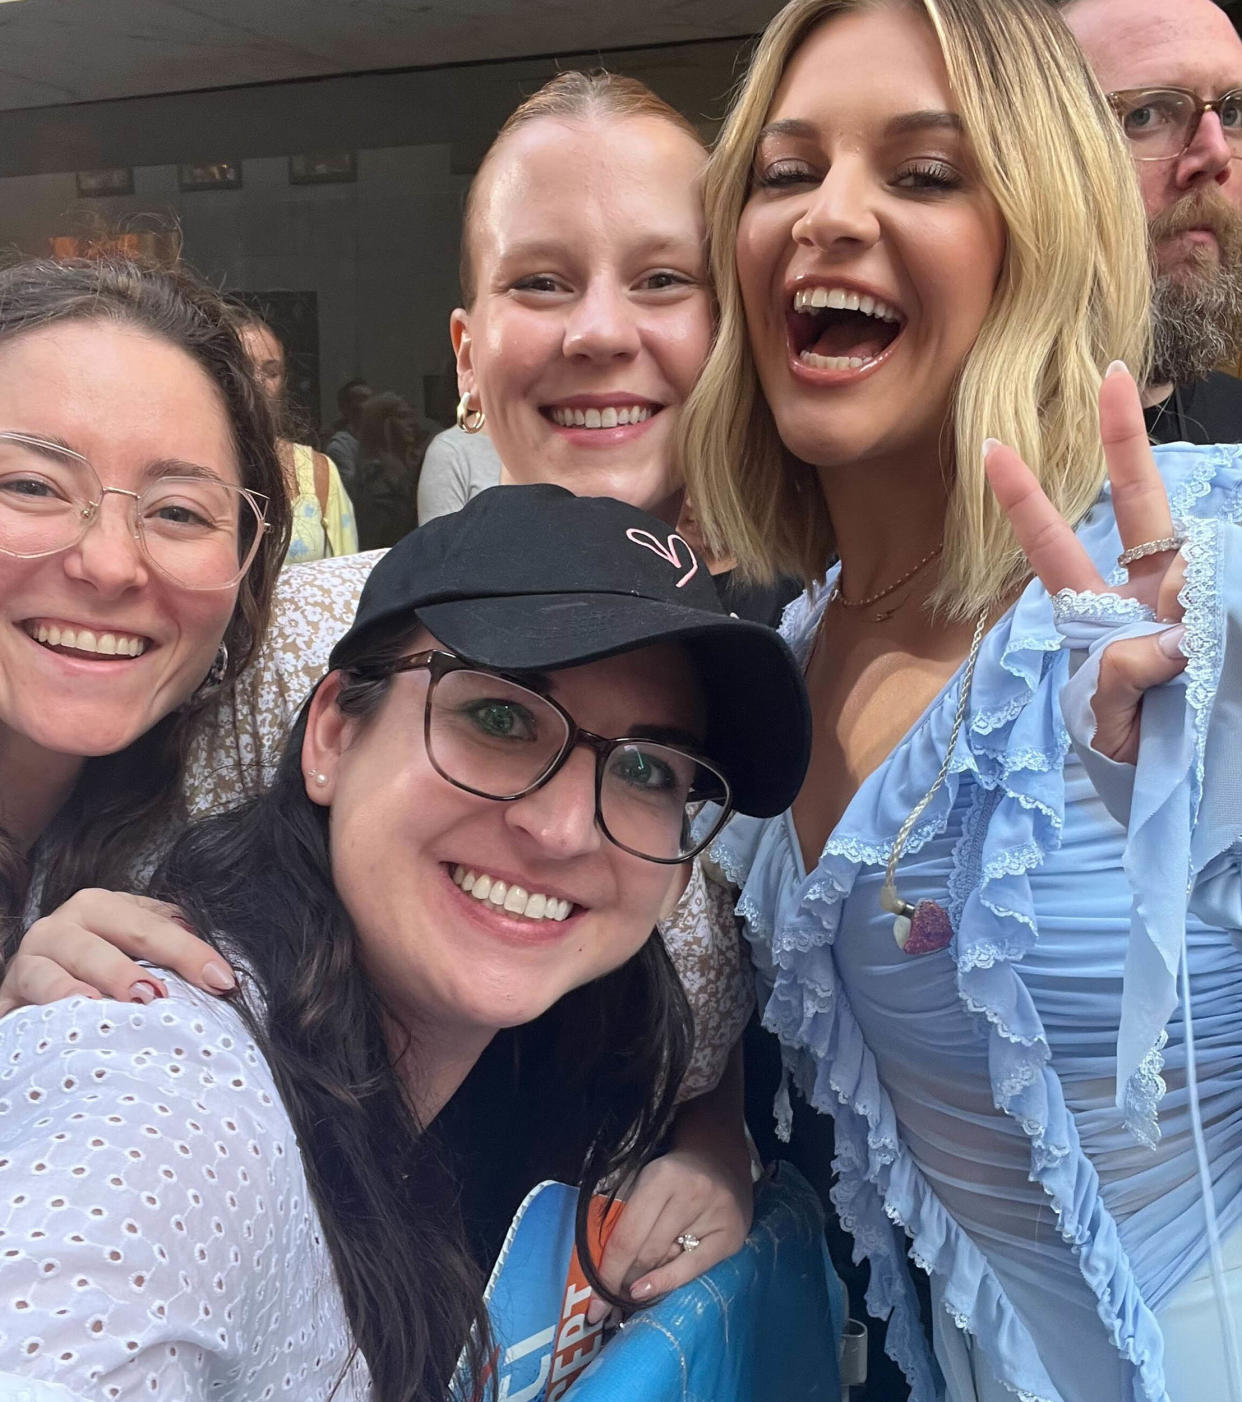 Andrea Trager and her friends take a selfie with Kelsea Ballerini at TODAY's Citi Concert Series. (TODAY)